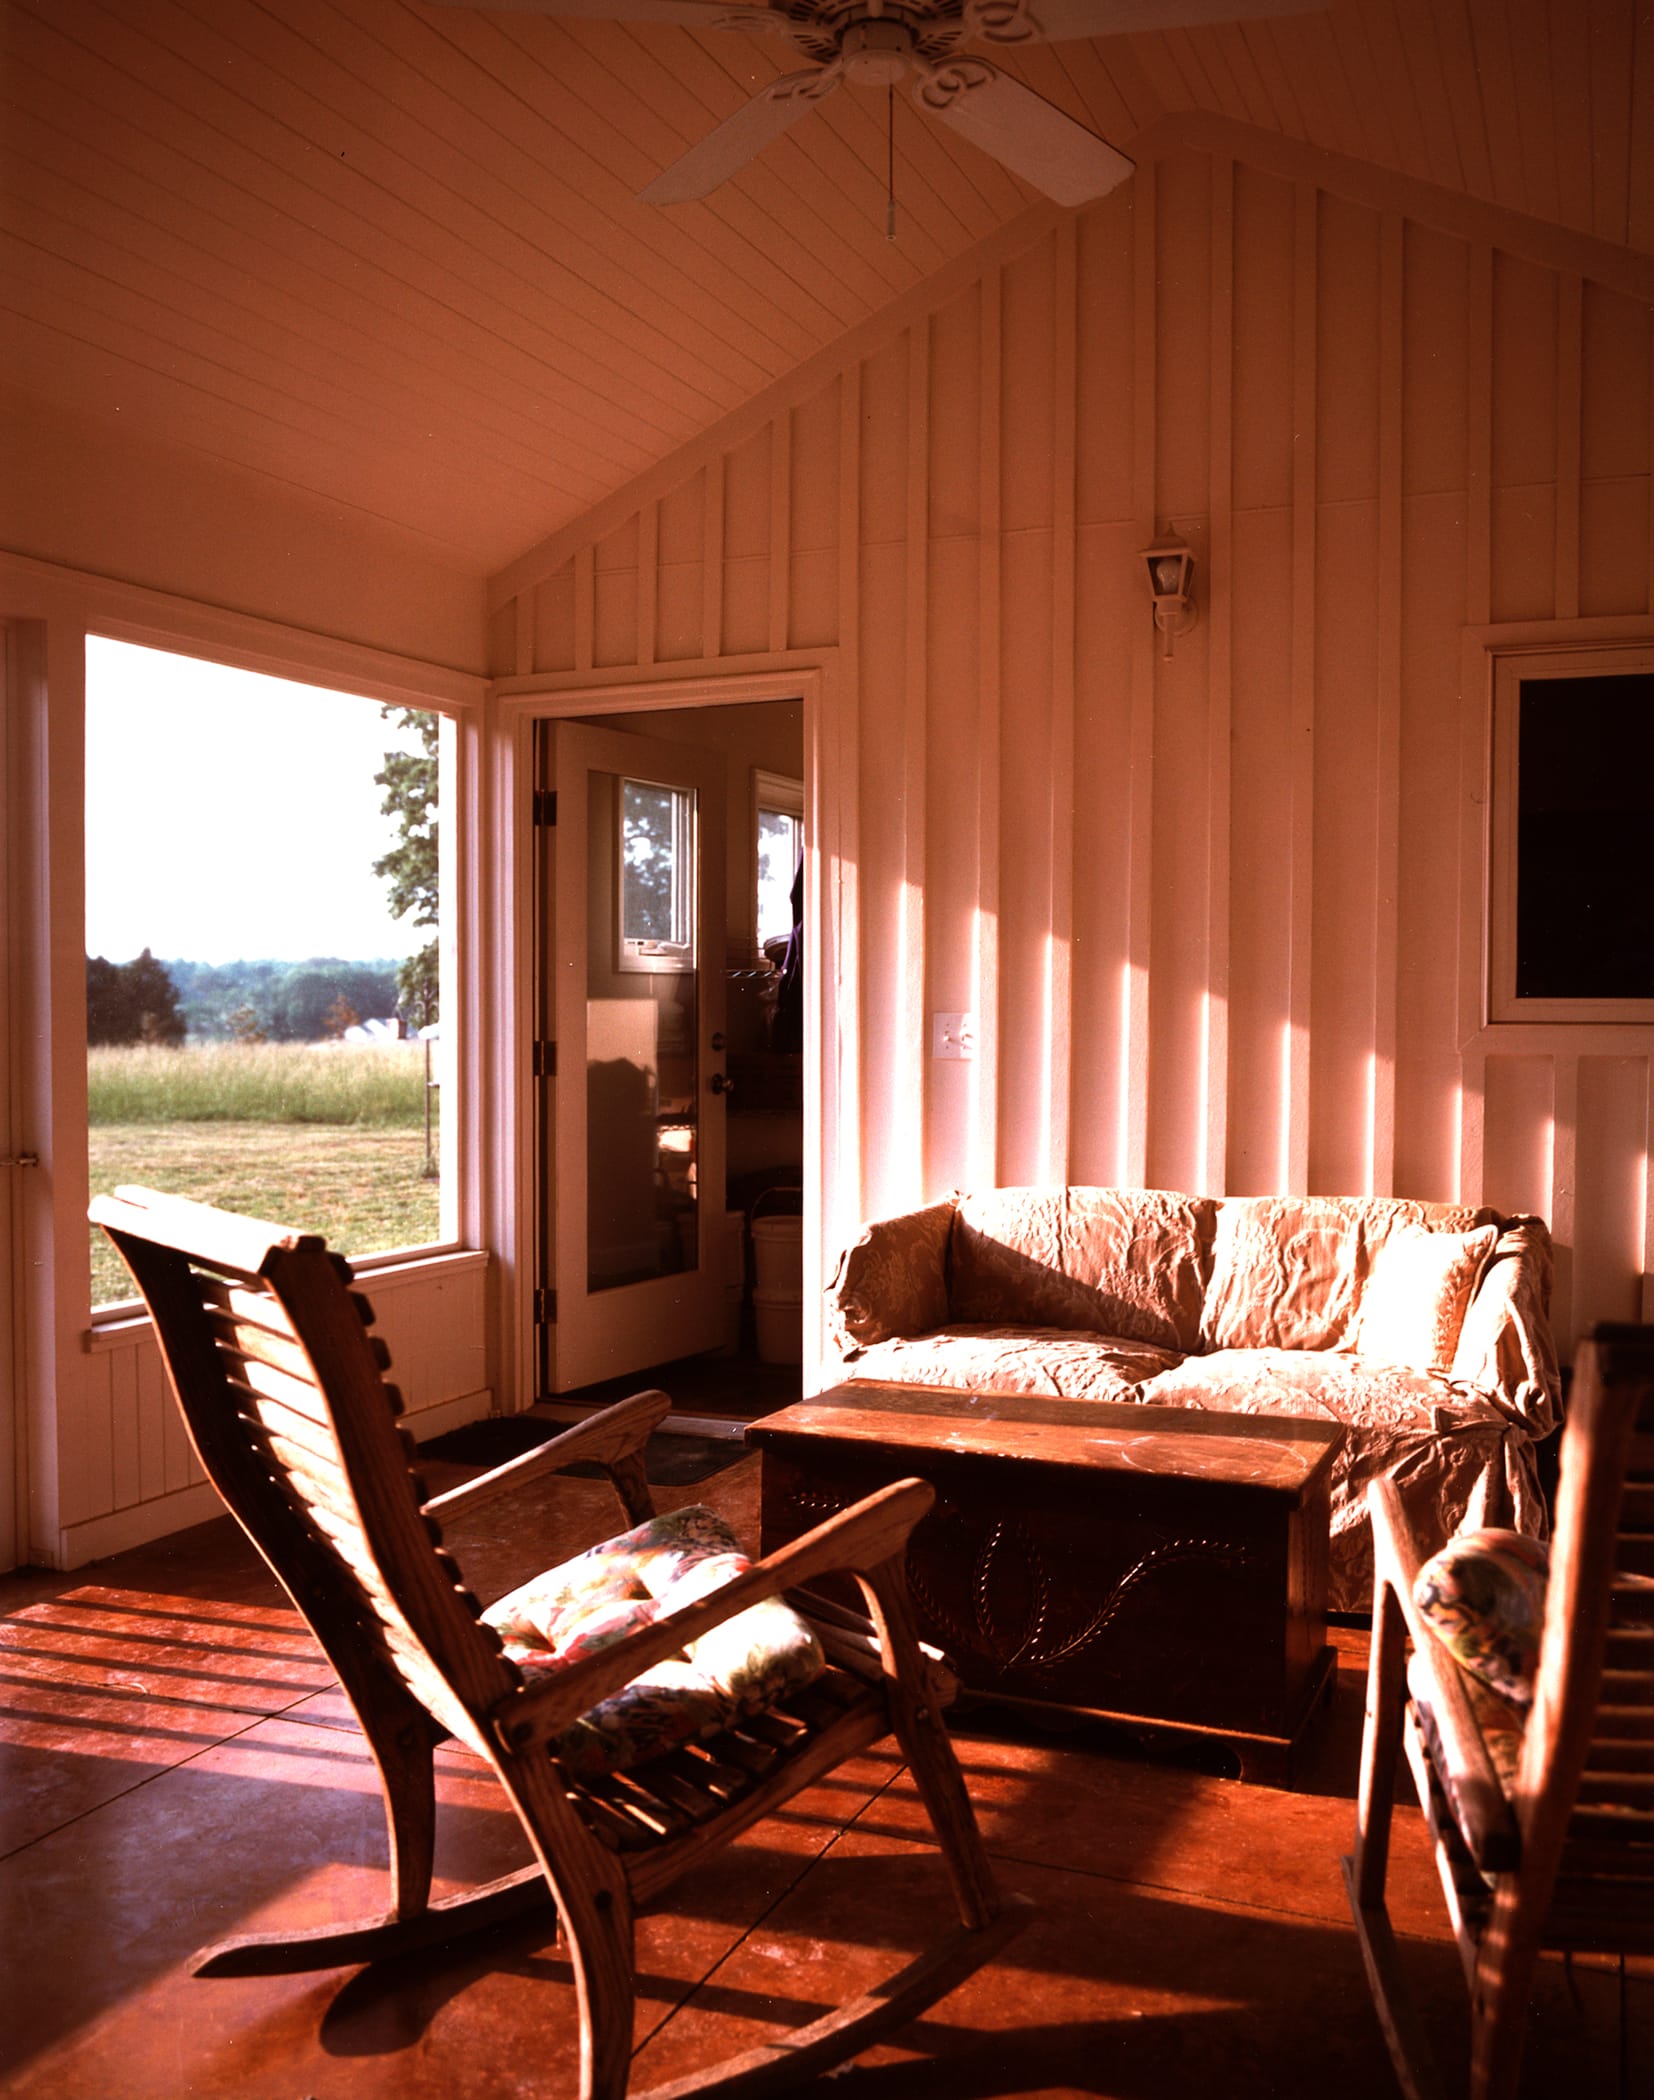 Cozy screen porch looking over the meadow